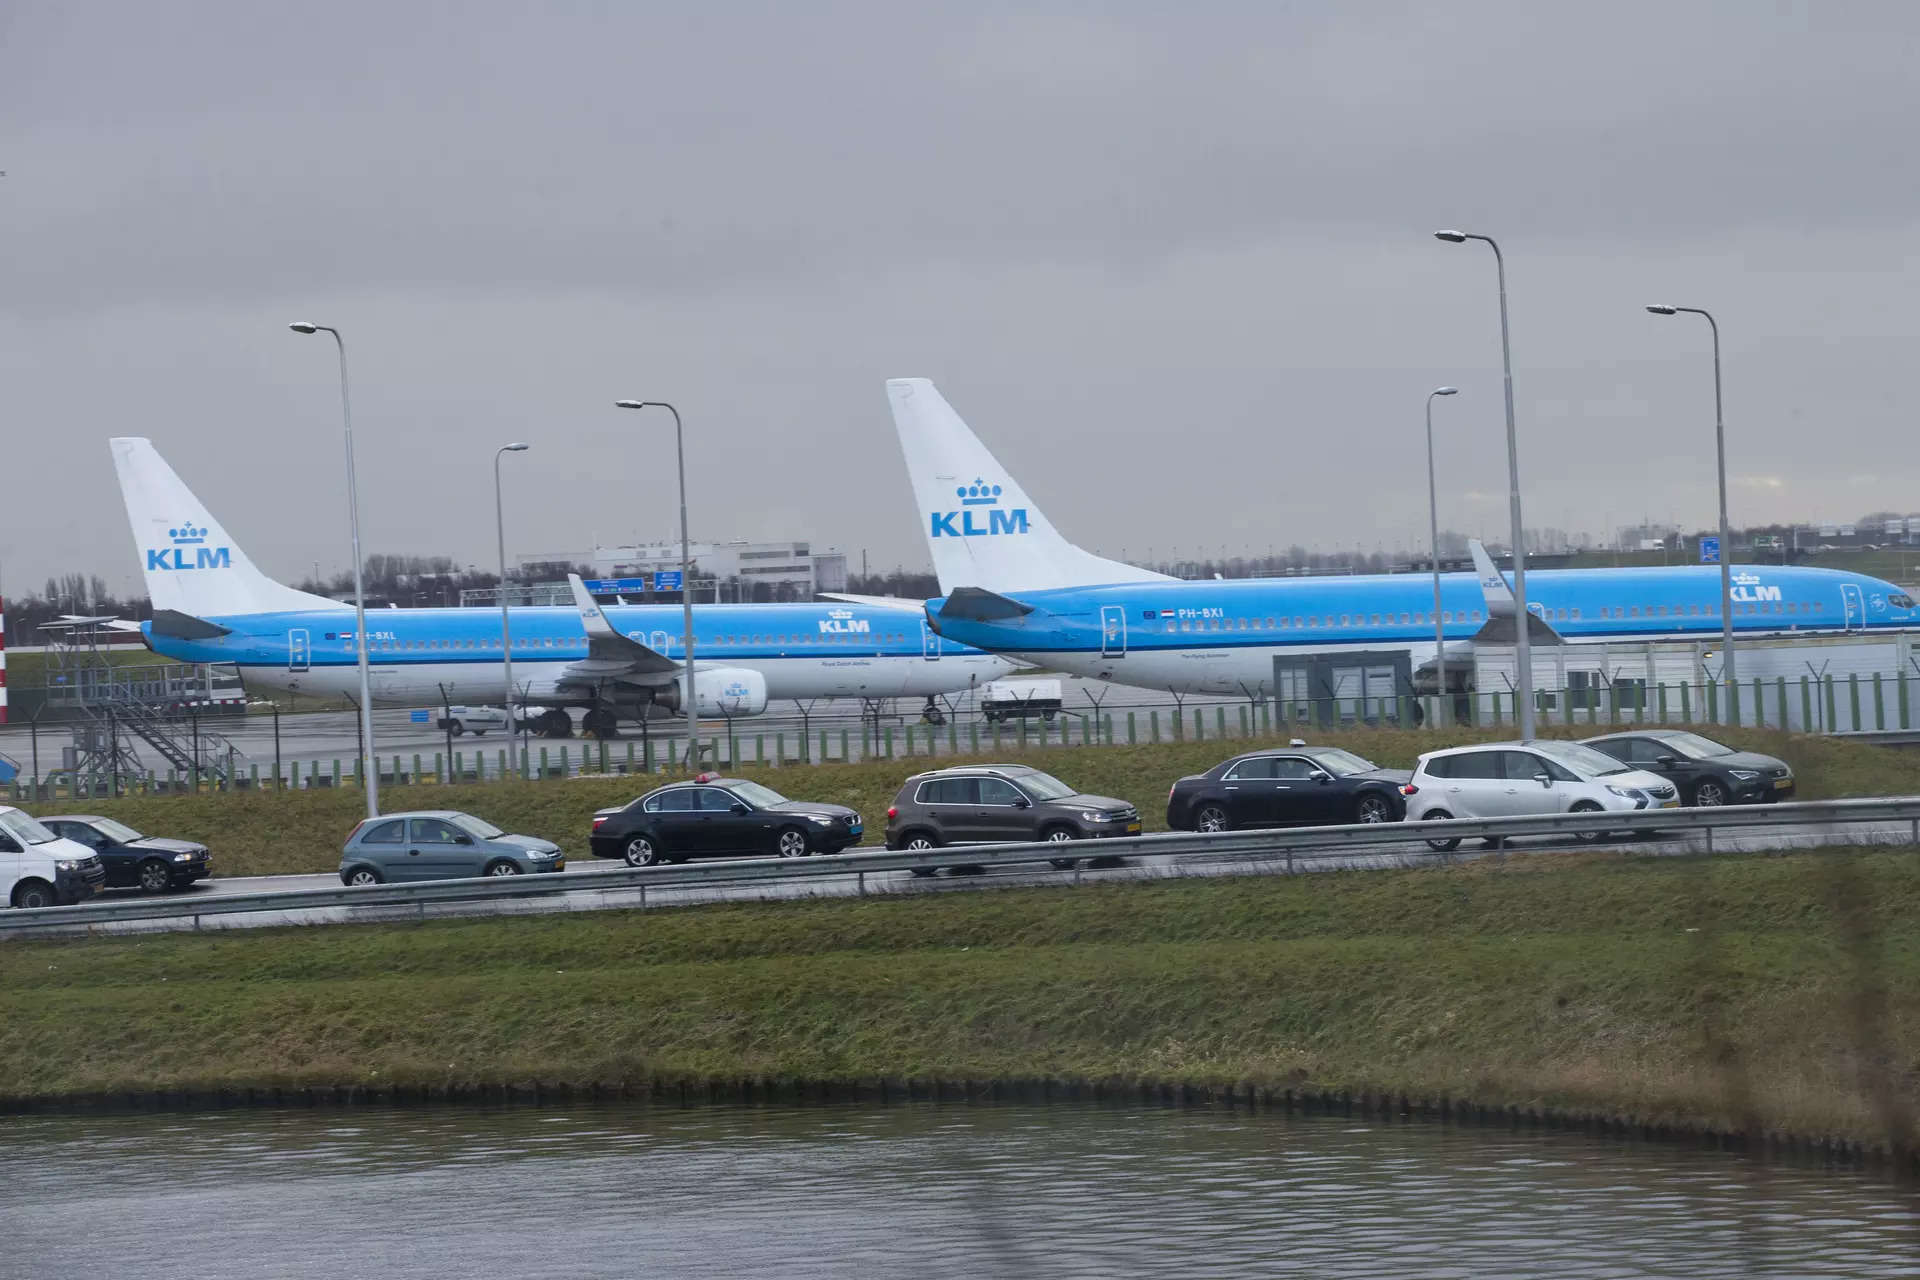 <p>FILE - KLM airplanes sit in Schiphol Airport near Amsterdam, Netherlands, on Jan. 18, 2018. Appeals judges in Amsterdam on Friday, July 7, 2023, ruled that the Dutch government can order Schiphol Airport, one of Europe's busiest aviation hubs, to reduce the number of flights from 500,000 per year to 460,000. The ruling at Amsterdam Court of Appeal overturned a lower court's decision in April that the government did not follow the correct procedure when it called on Schiphol last year to reduce flight numbers. (AP Photo/Peter Dejong)</p>